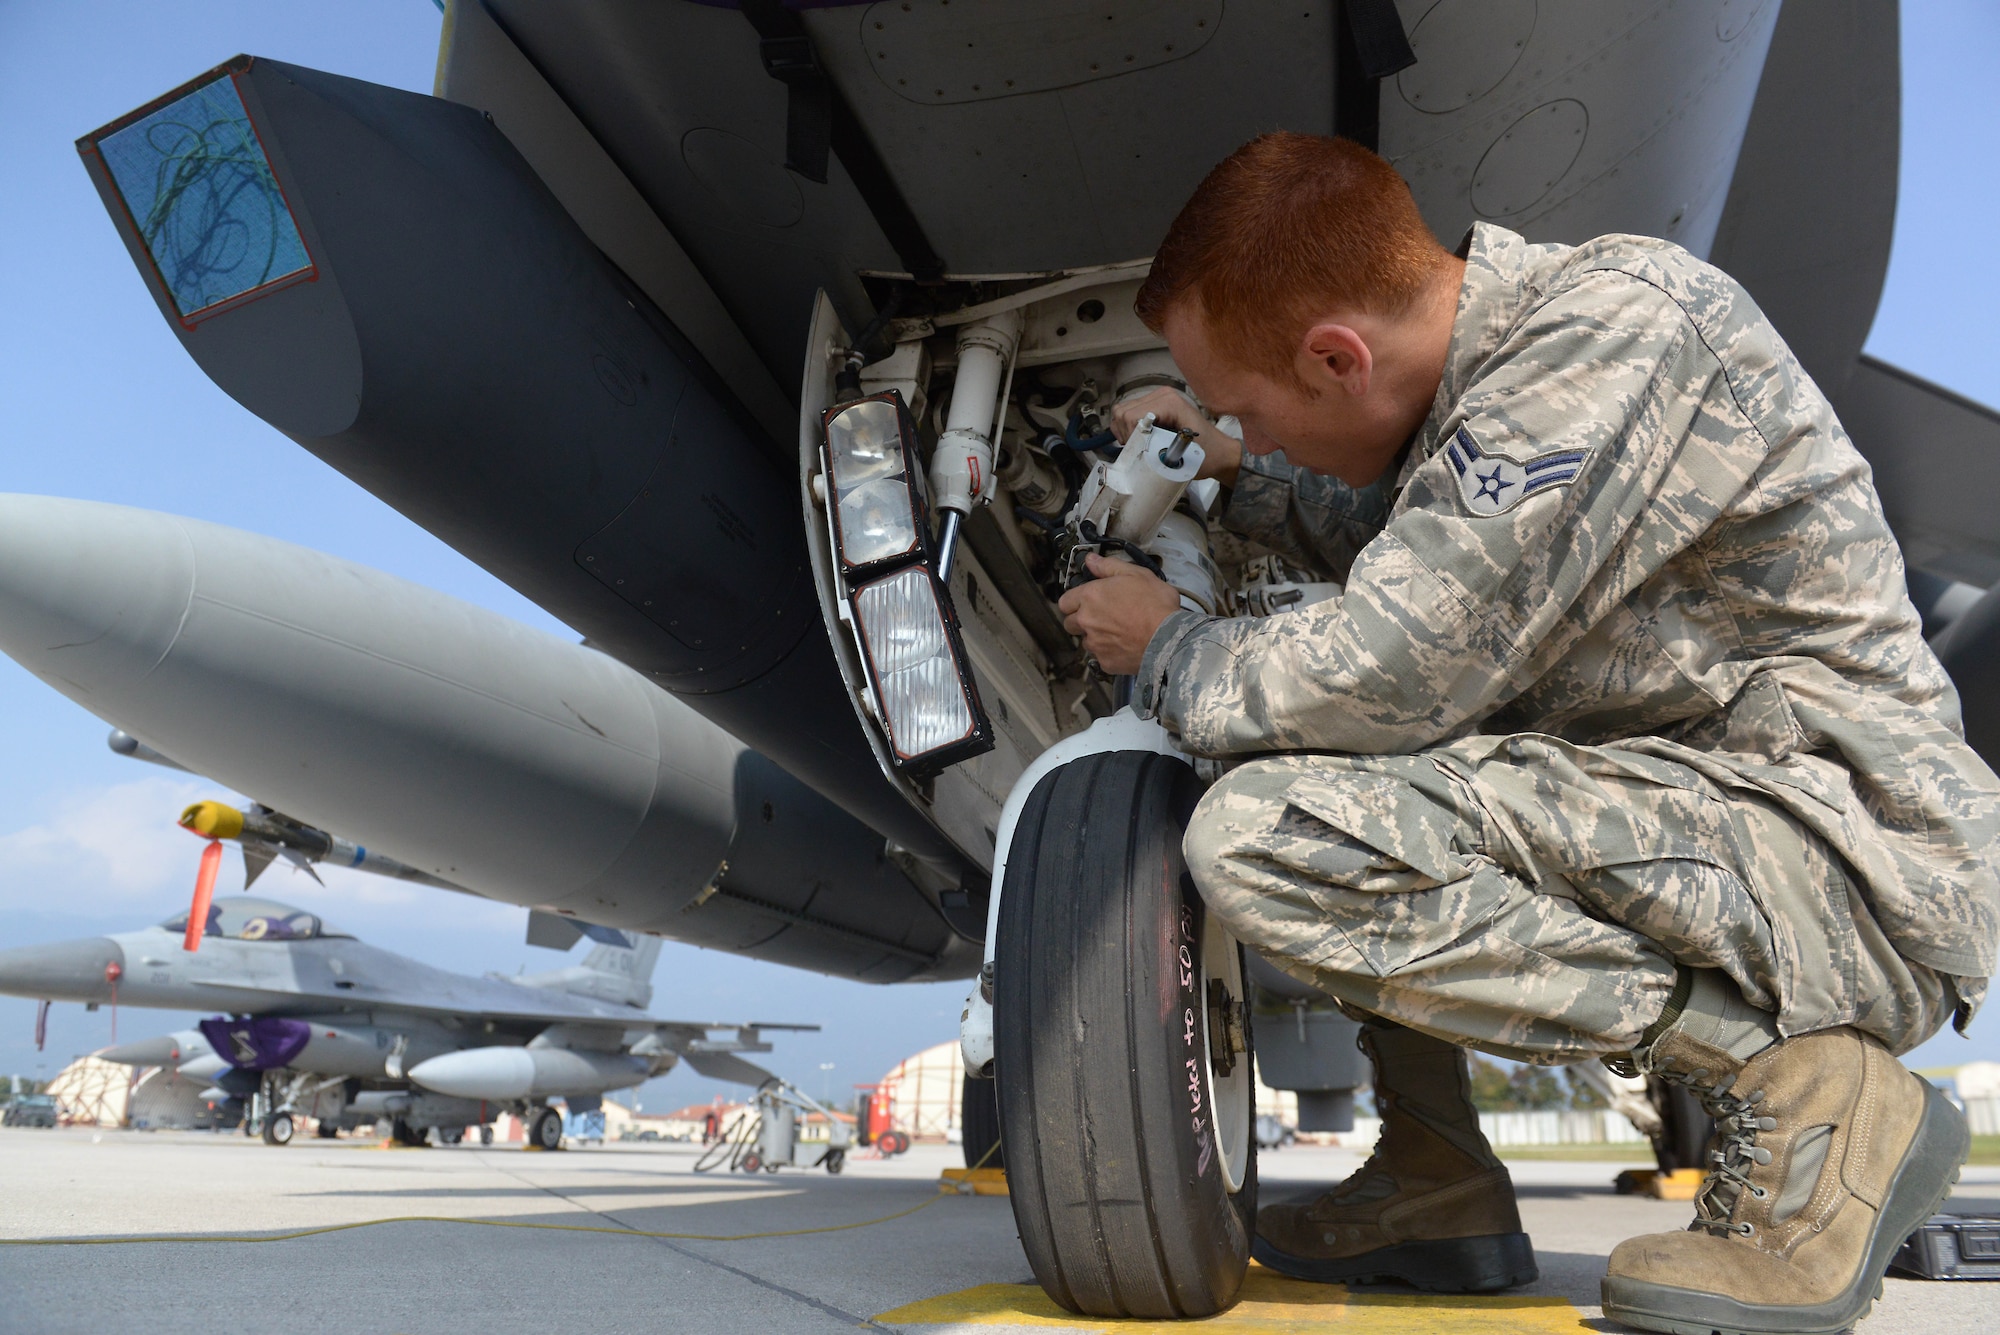 Airman 1st Class Matthew Galati, 31st Aircraft Maintenance Squadron crew chief, checks the landing gear of an F-16 Fighting Falcon during pre-flight inspections, Oct. 7, 2014, at Aviano Air Base, Italy. Crew chiefs meticulously inspect a jet for any mechanical problems before a pilot takes flight. (U.S. Air Force photo/Airman 1st Class Ryan Conroy) 